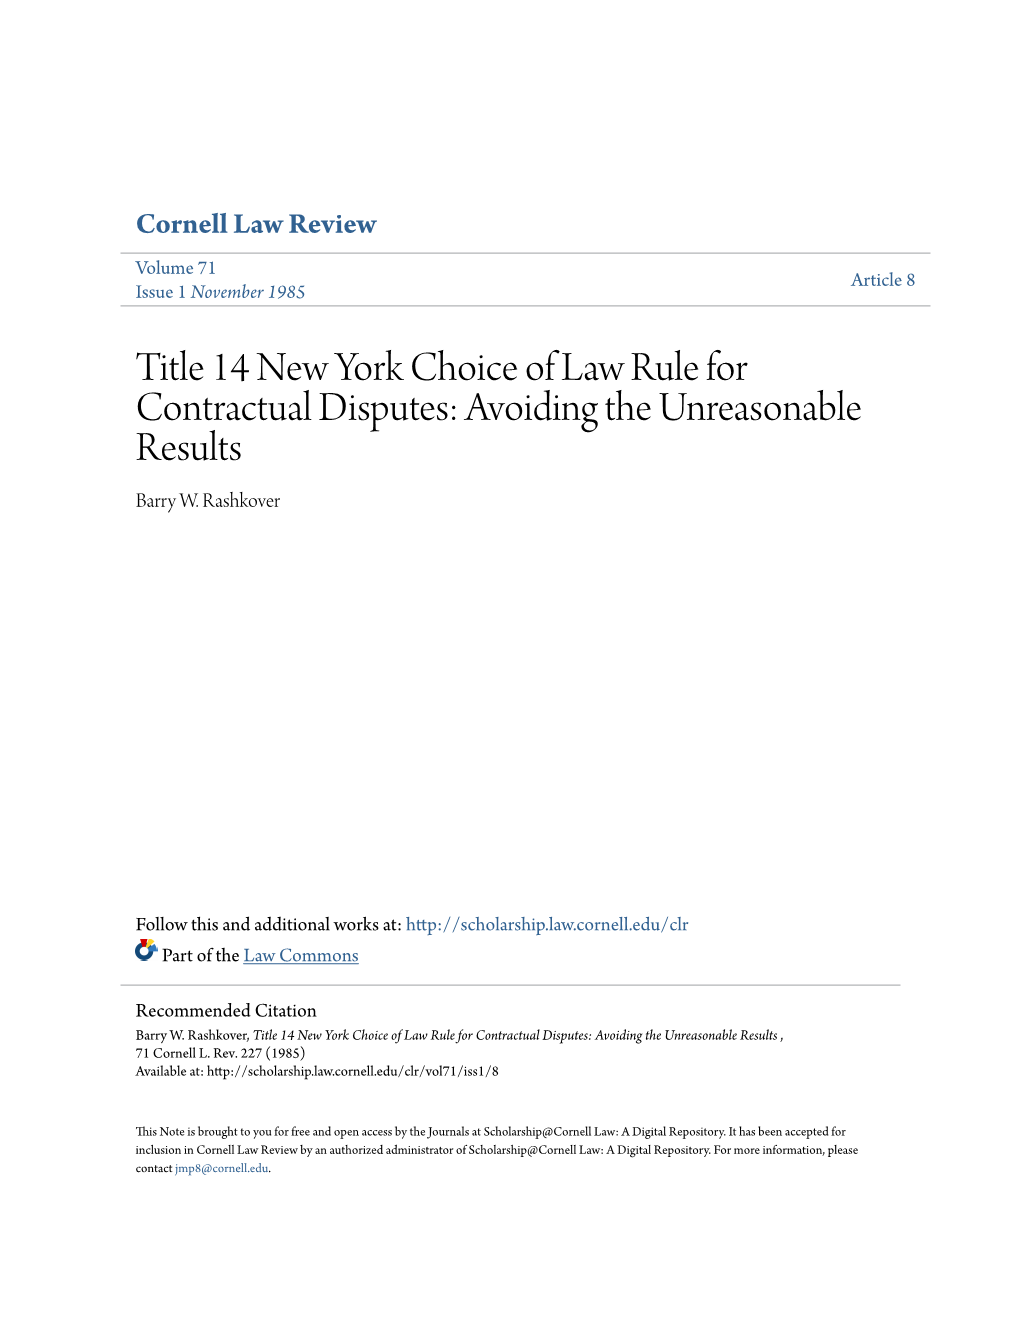 Title 14 New York Choice of Law Rule for Contractual Disputes: Avoiding the Unreasonable Results Barry W